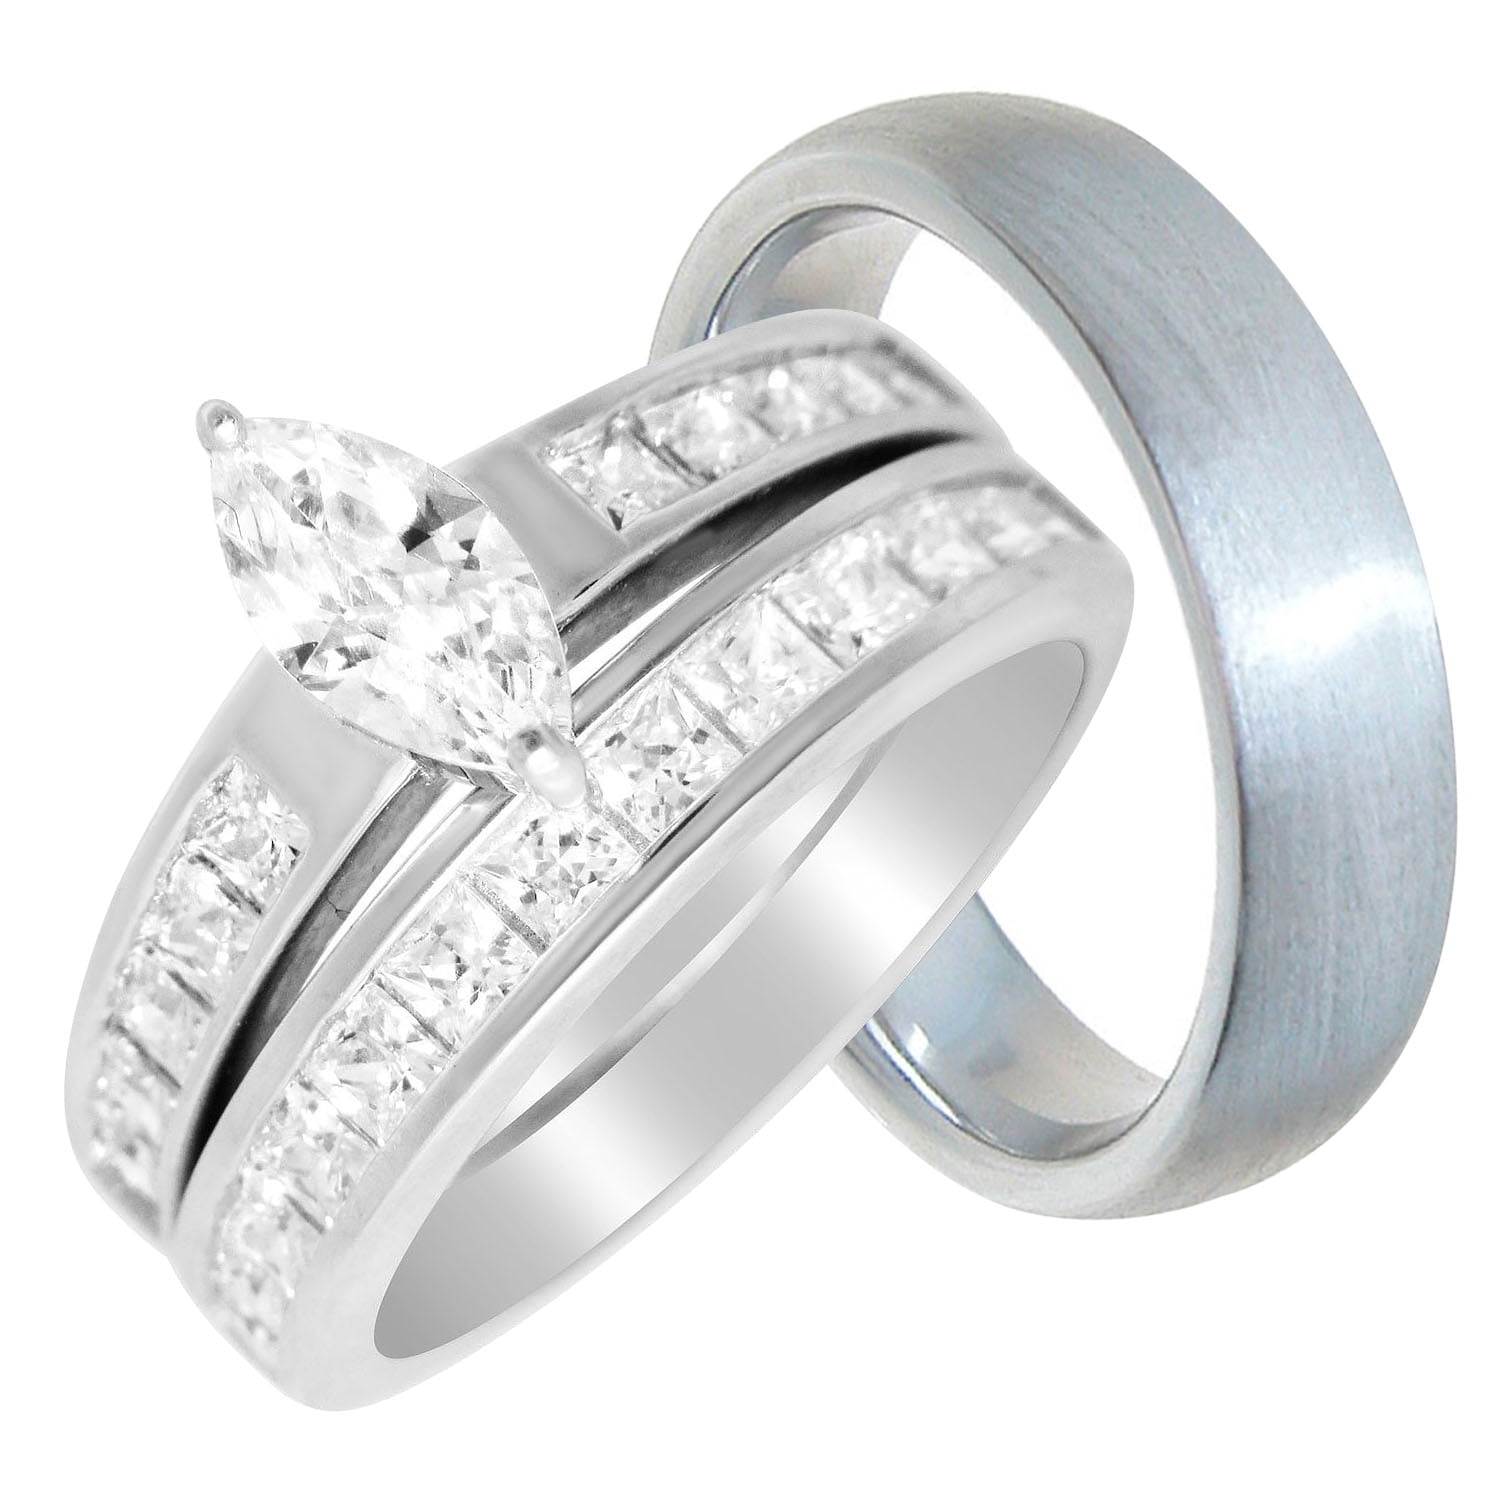 LaRaso & Co - His Hers Wedding Rings Set Cheap Wedding Bands for Him Her 7/8 - www.bagssaleusa.com/louis-vuitton/